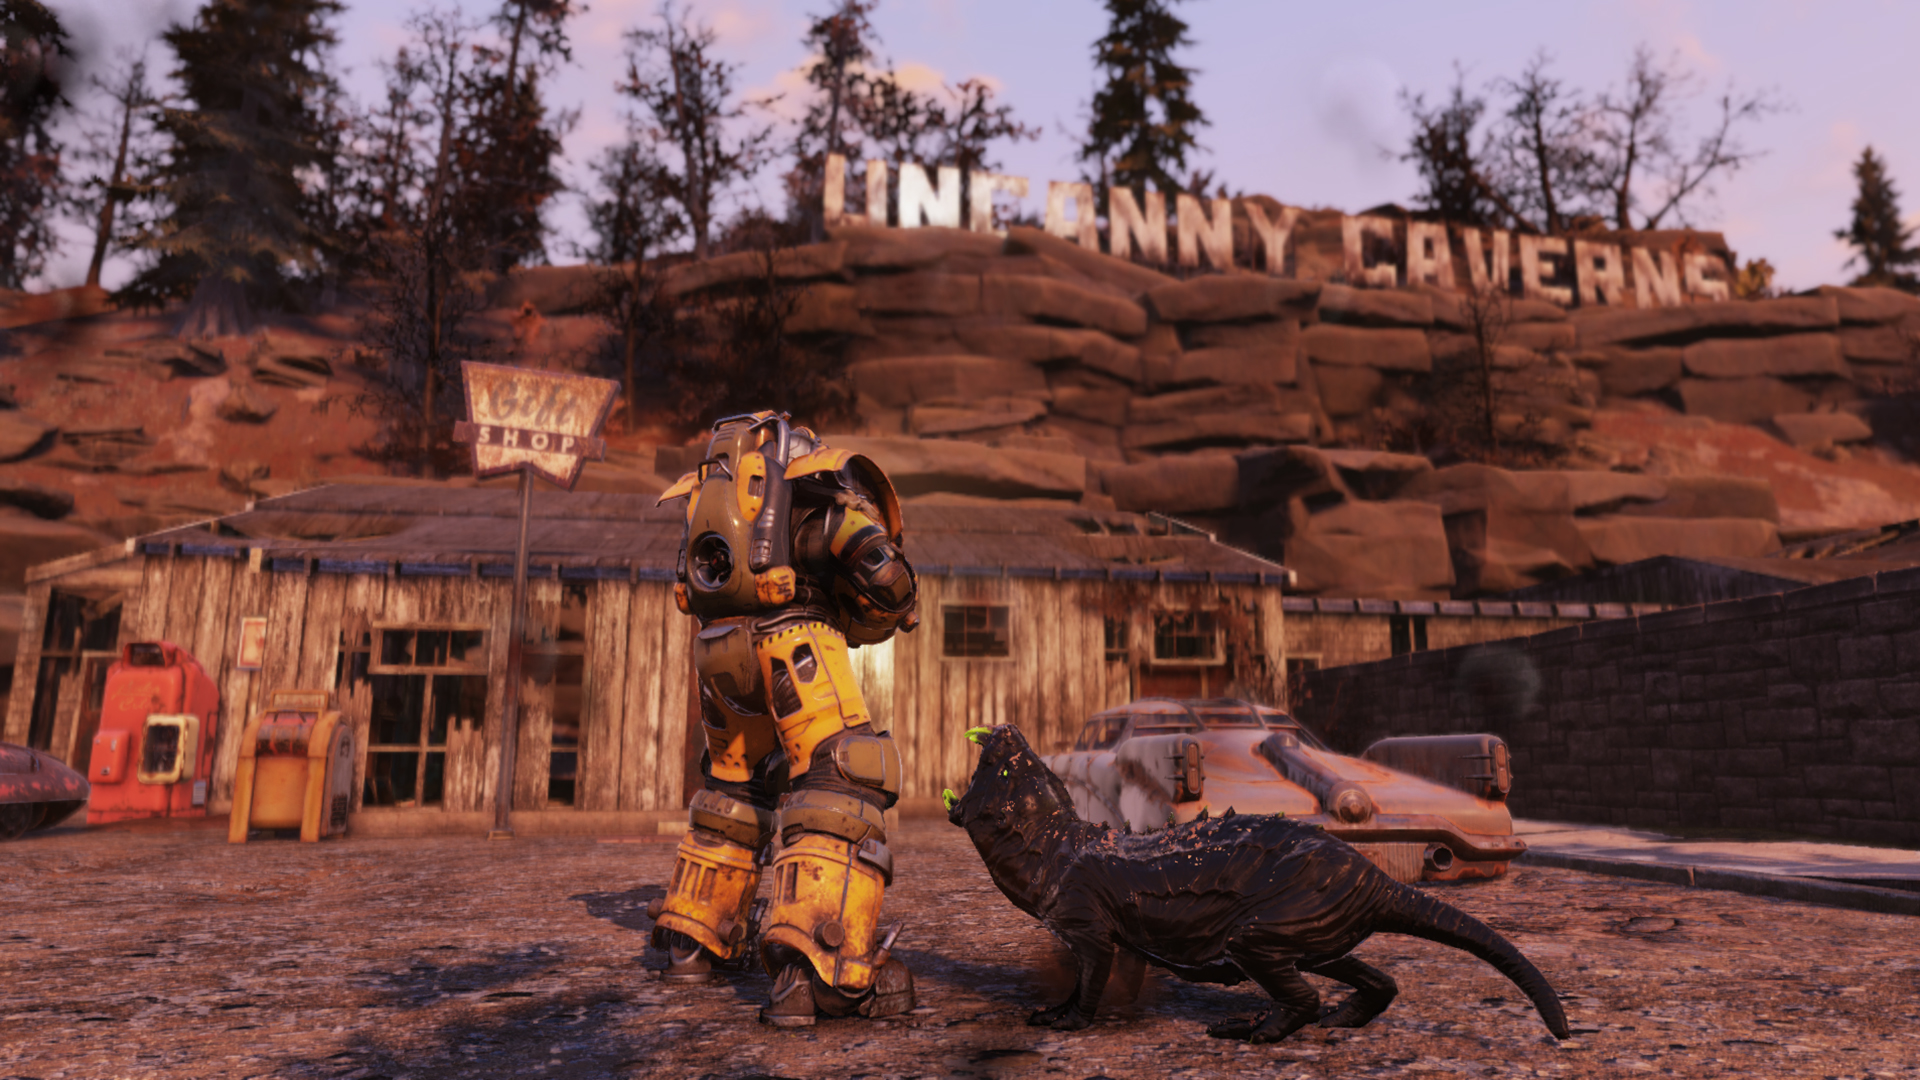 Fallout 76 Steel Reign review - player shot in front of Uncanny Caverns being attacked by a glowing mole rat